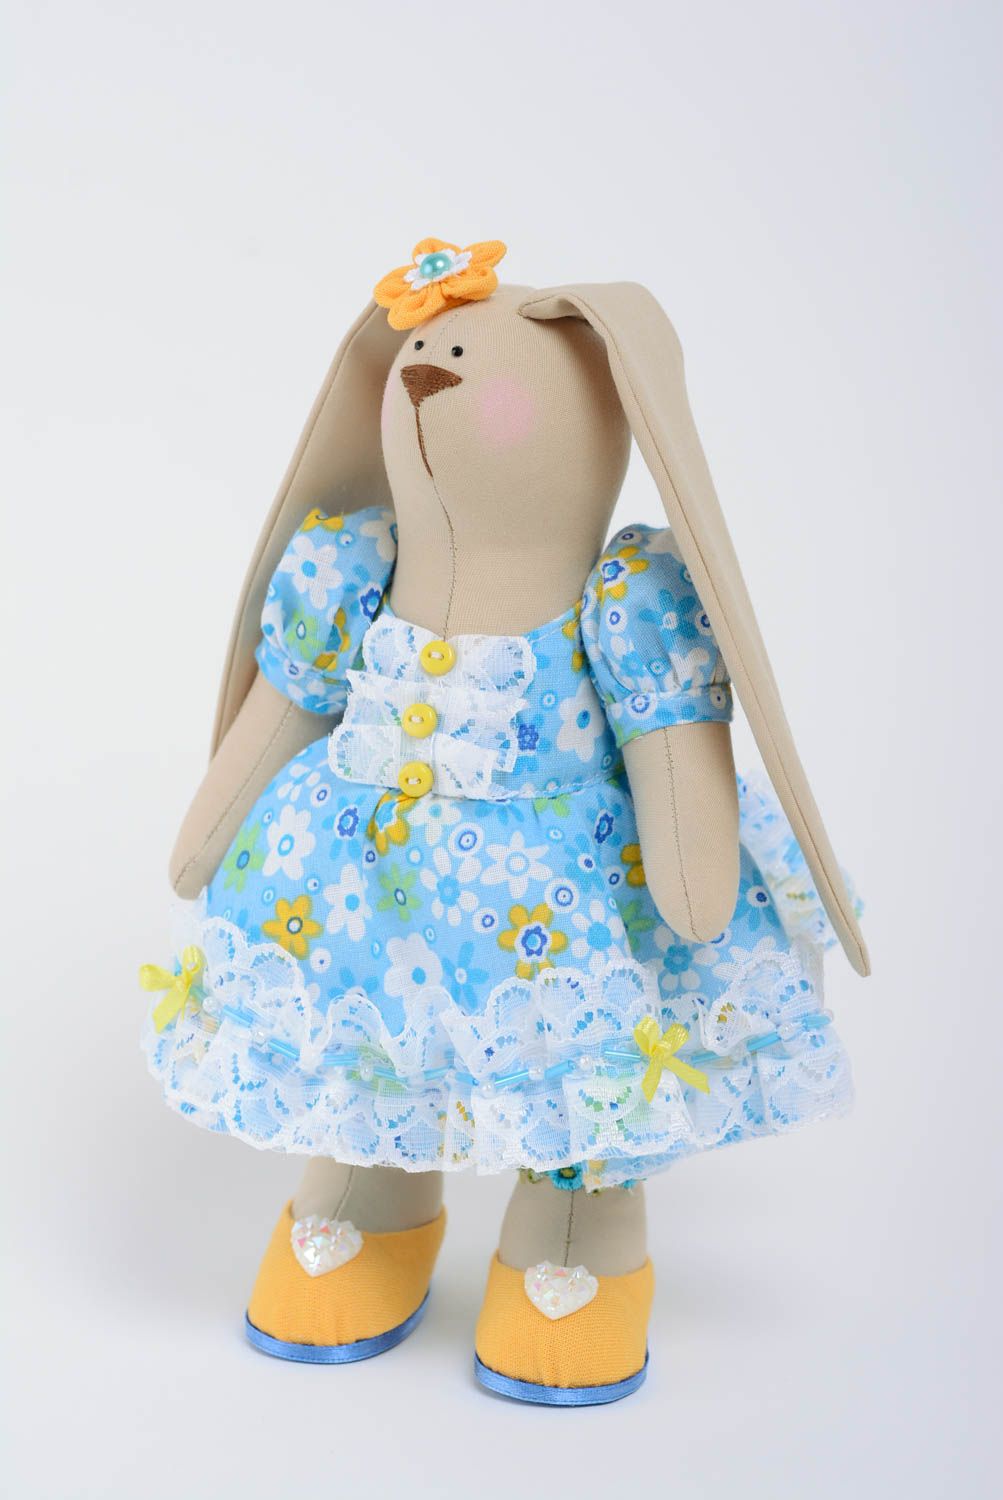 Small handmade fabric soft toy long-eared hare in blue dress photo 1